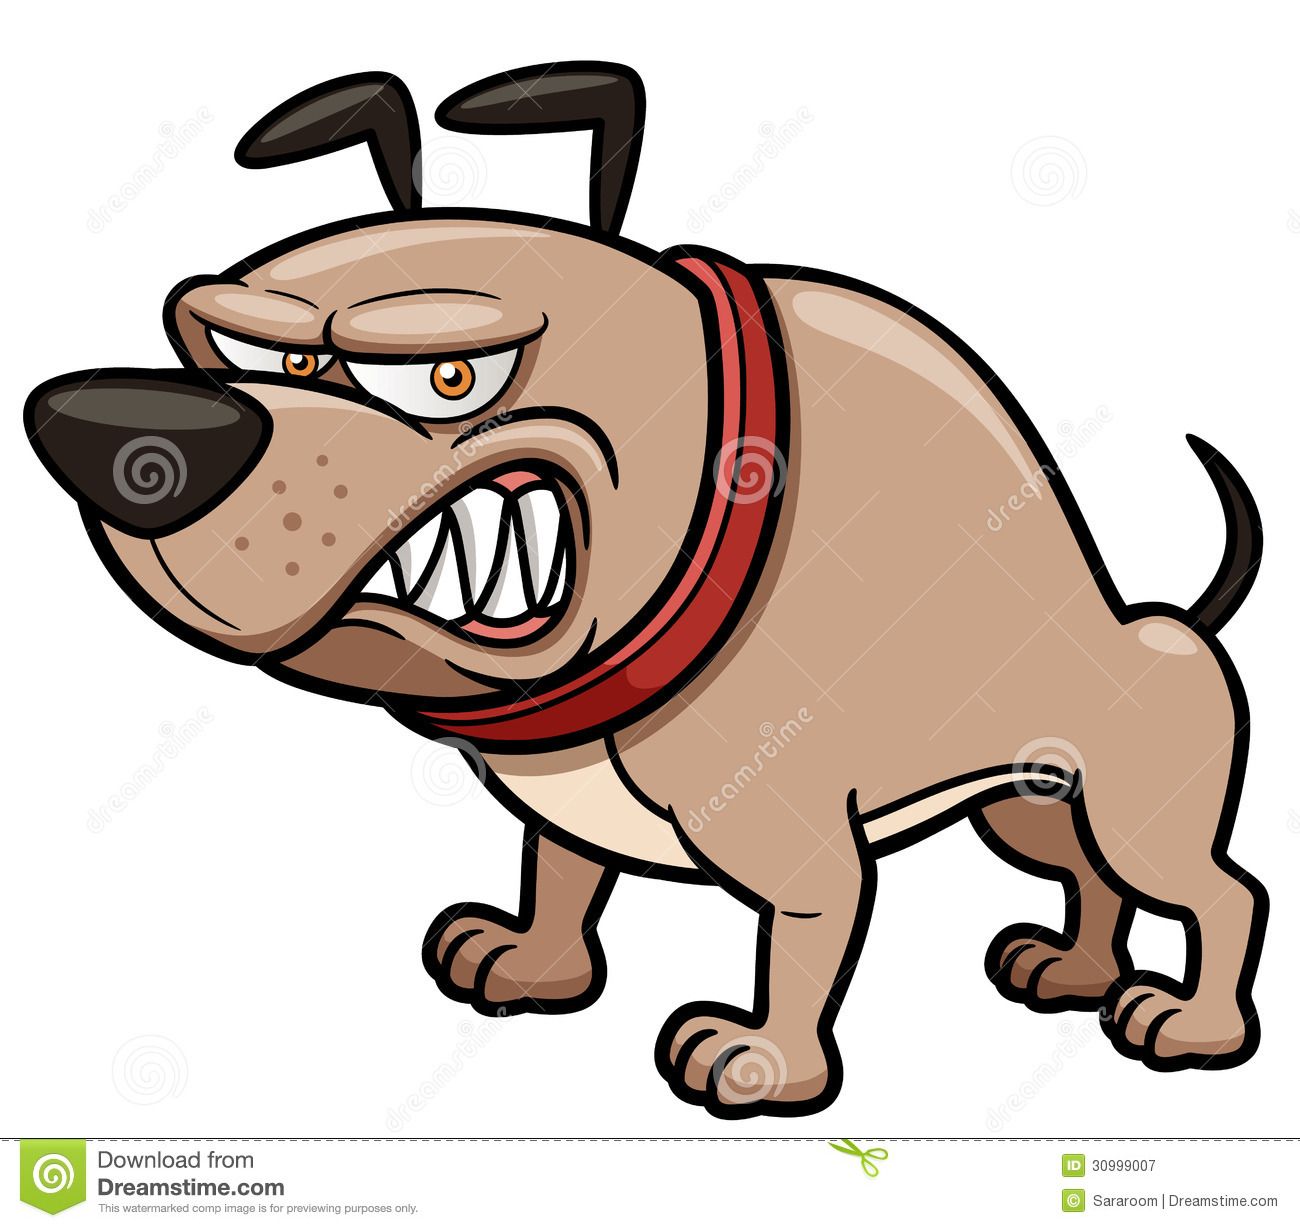 Clipart dogs angry, Clipart dogs angry Transparent FREE for download on